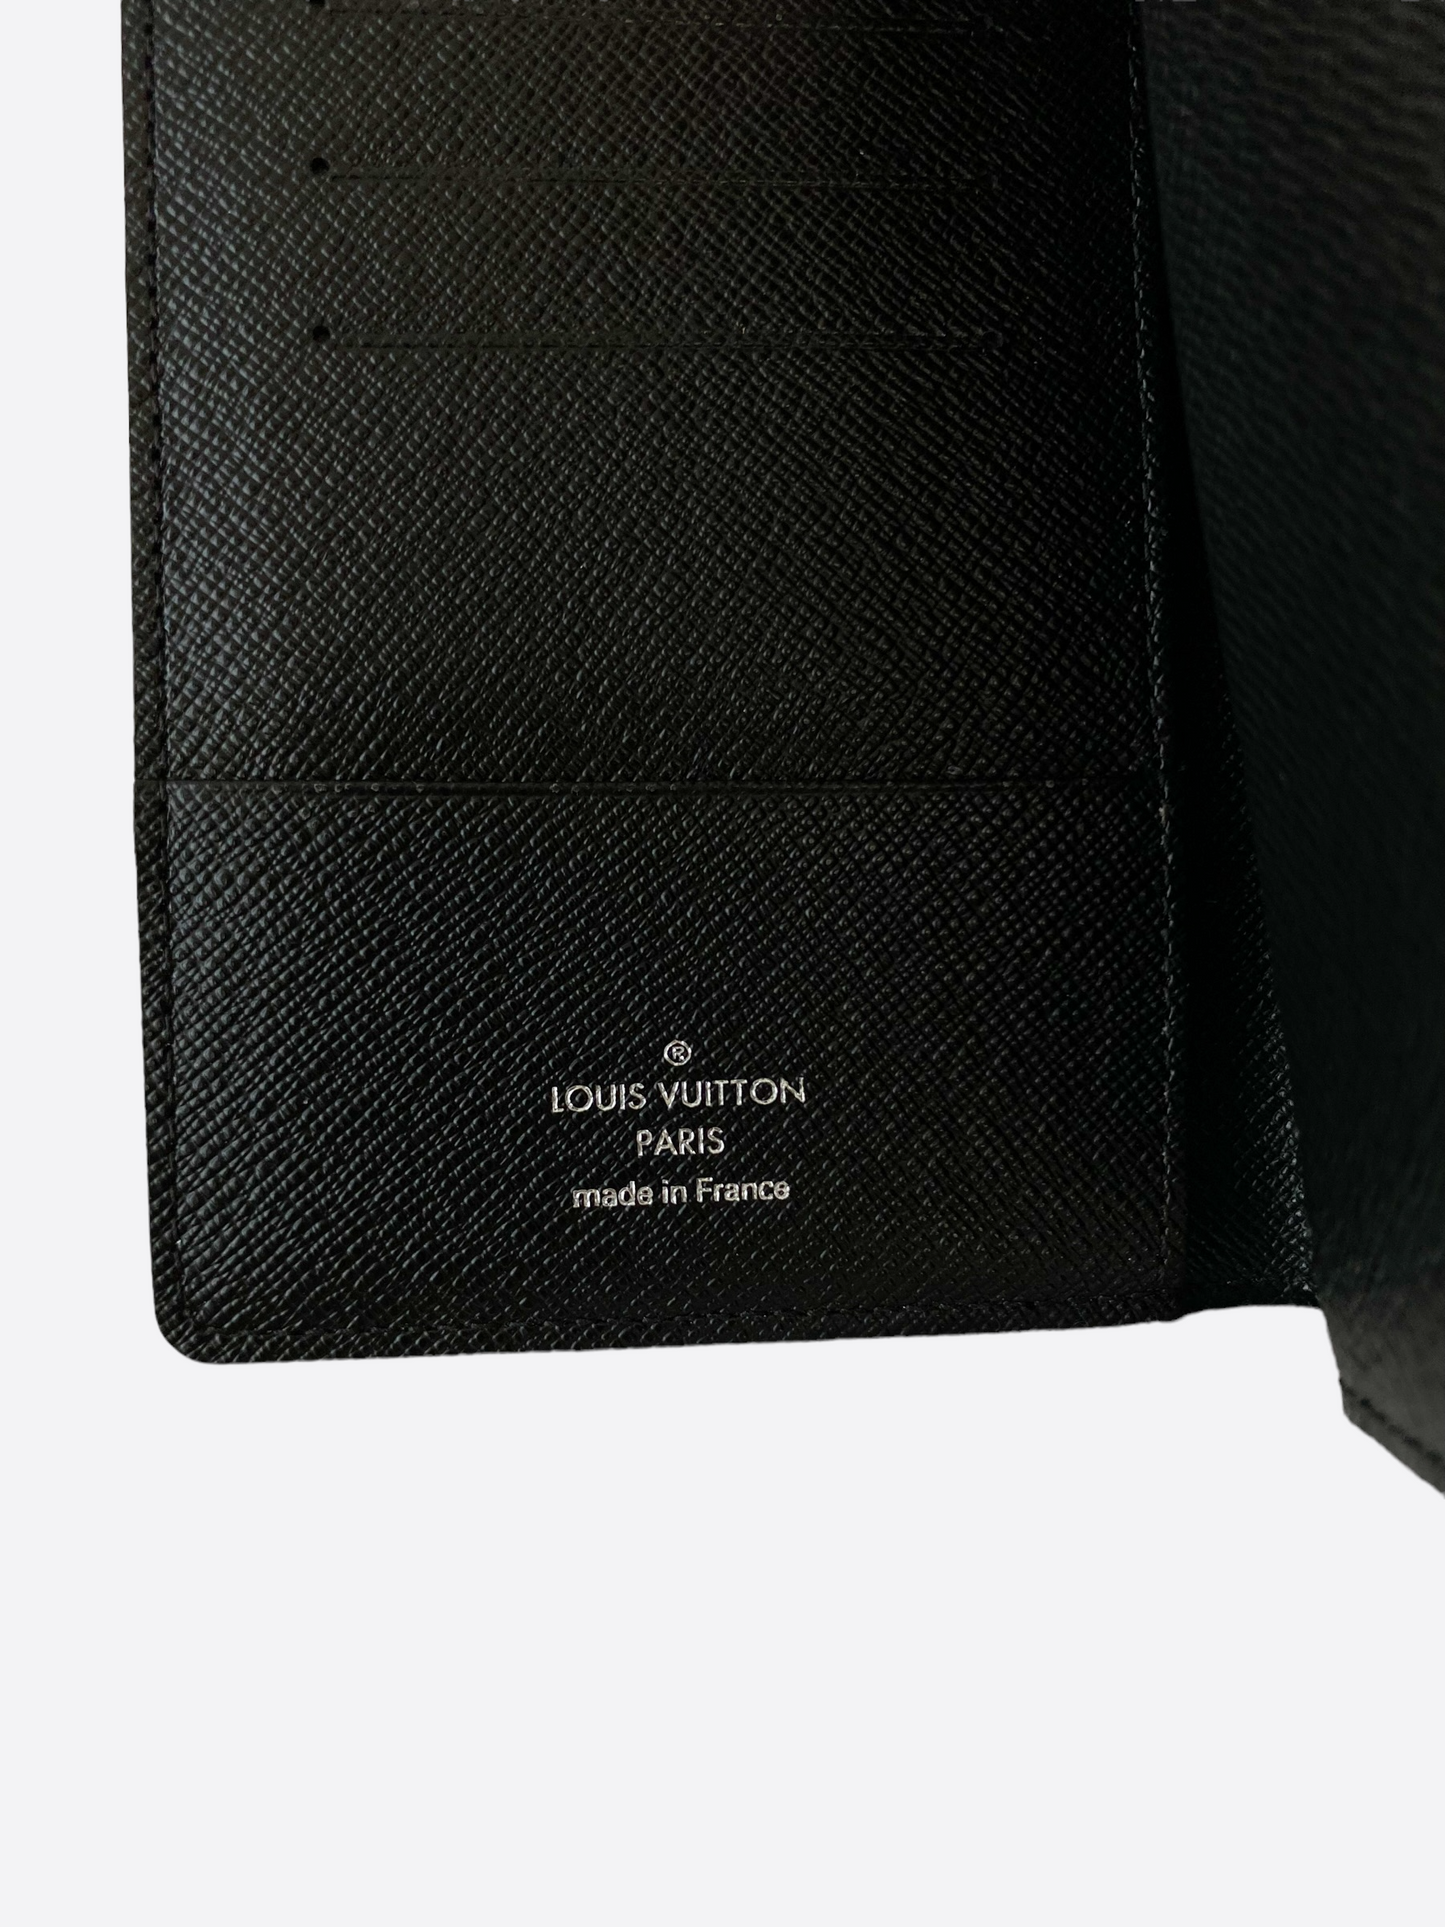 Louis Vuitton Passport Cover in Damier Graphite Review 